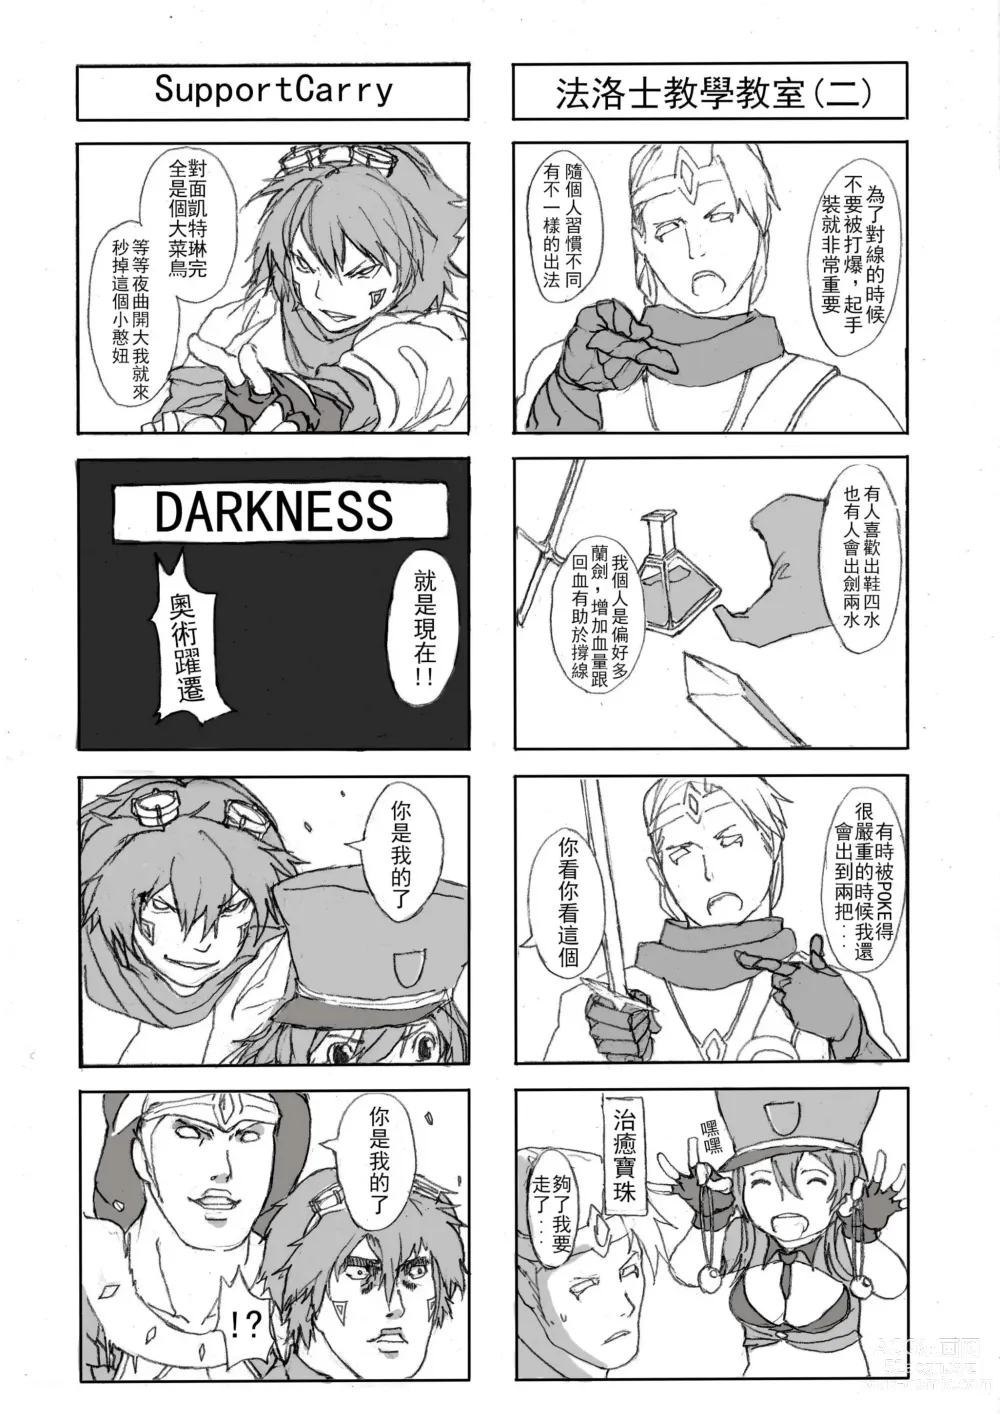 Page 22 of doujinshi 凱特琳壞壞 (League of Legends) [無修正]中文